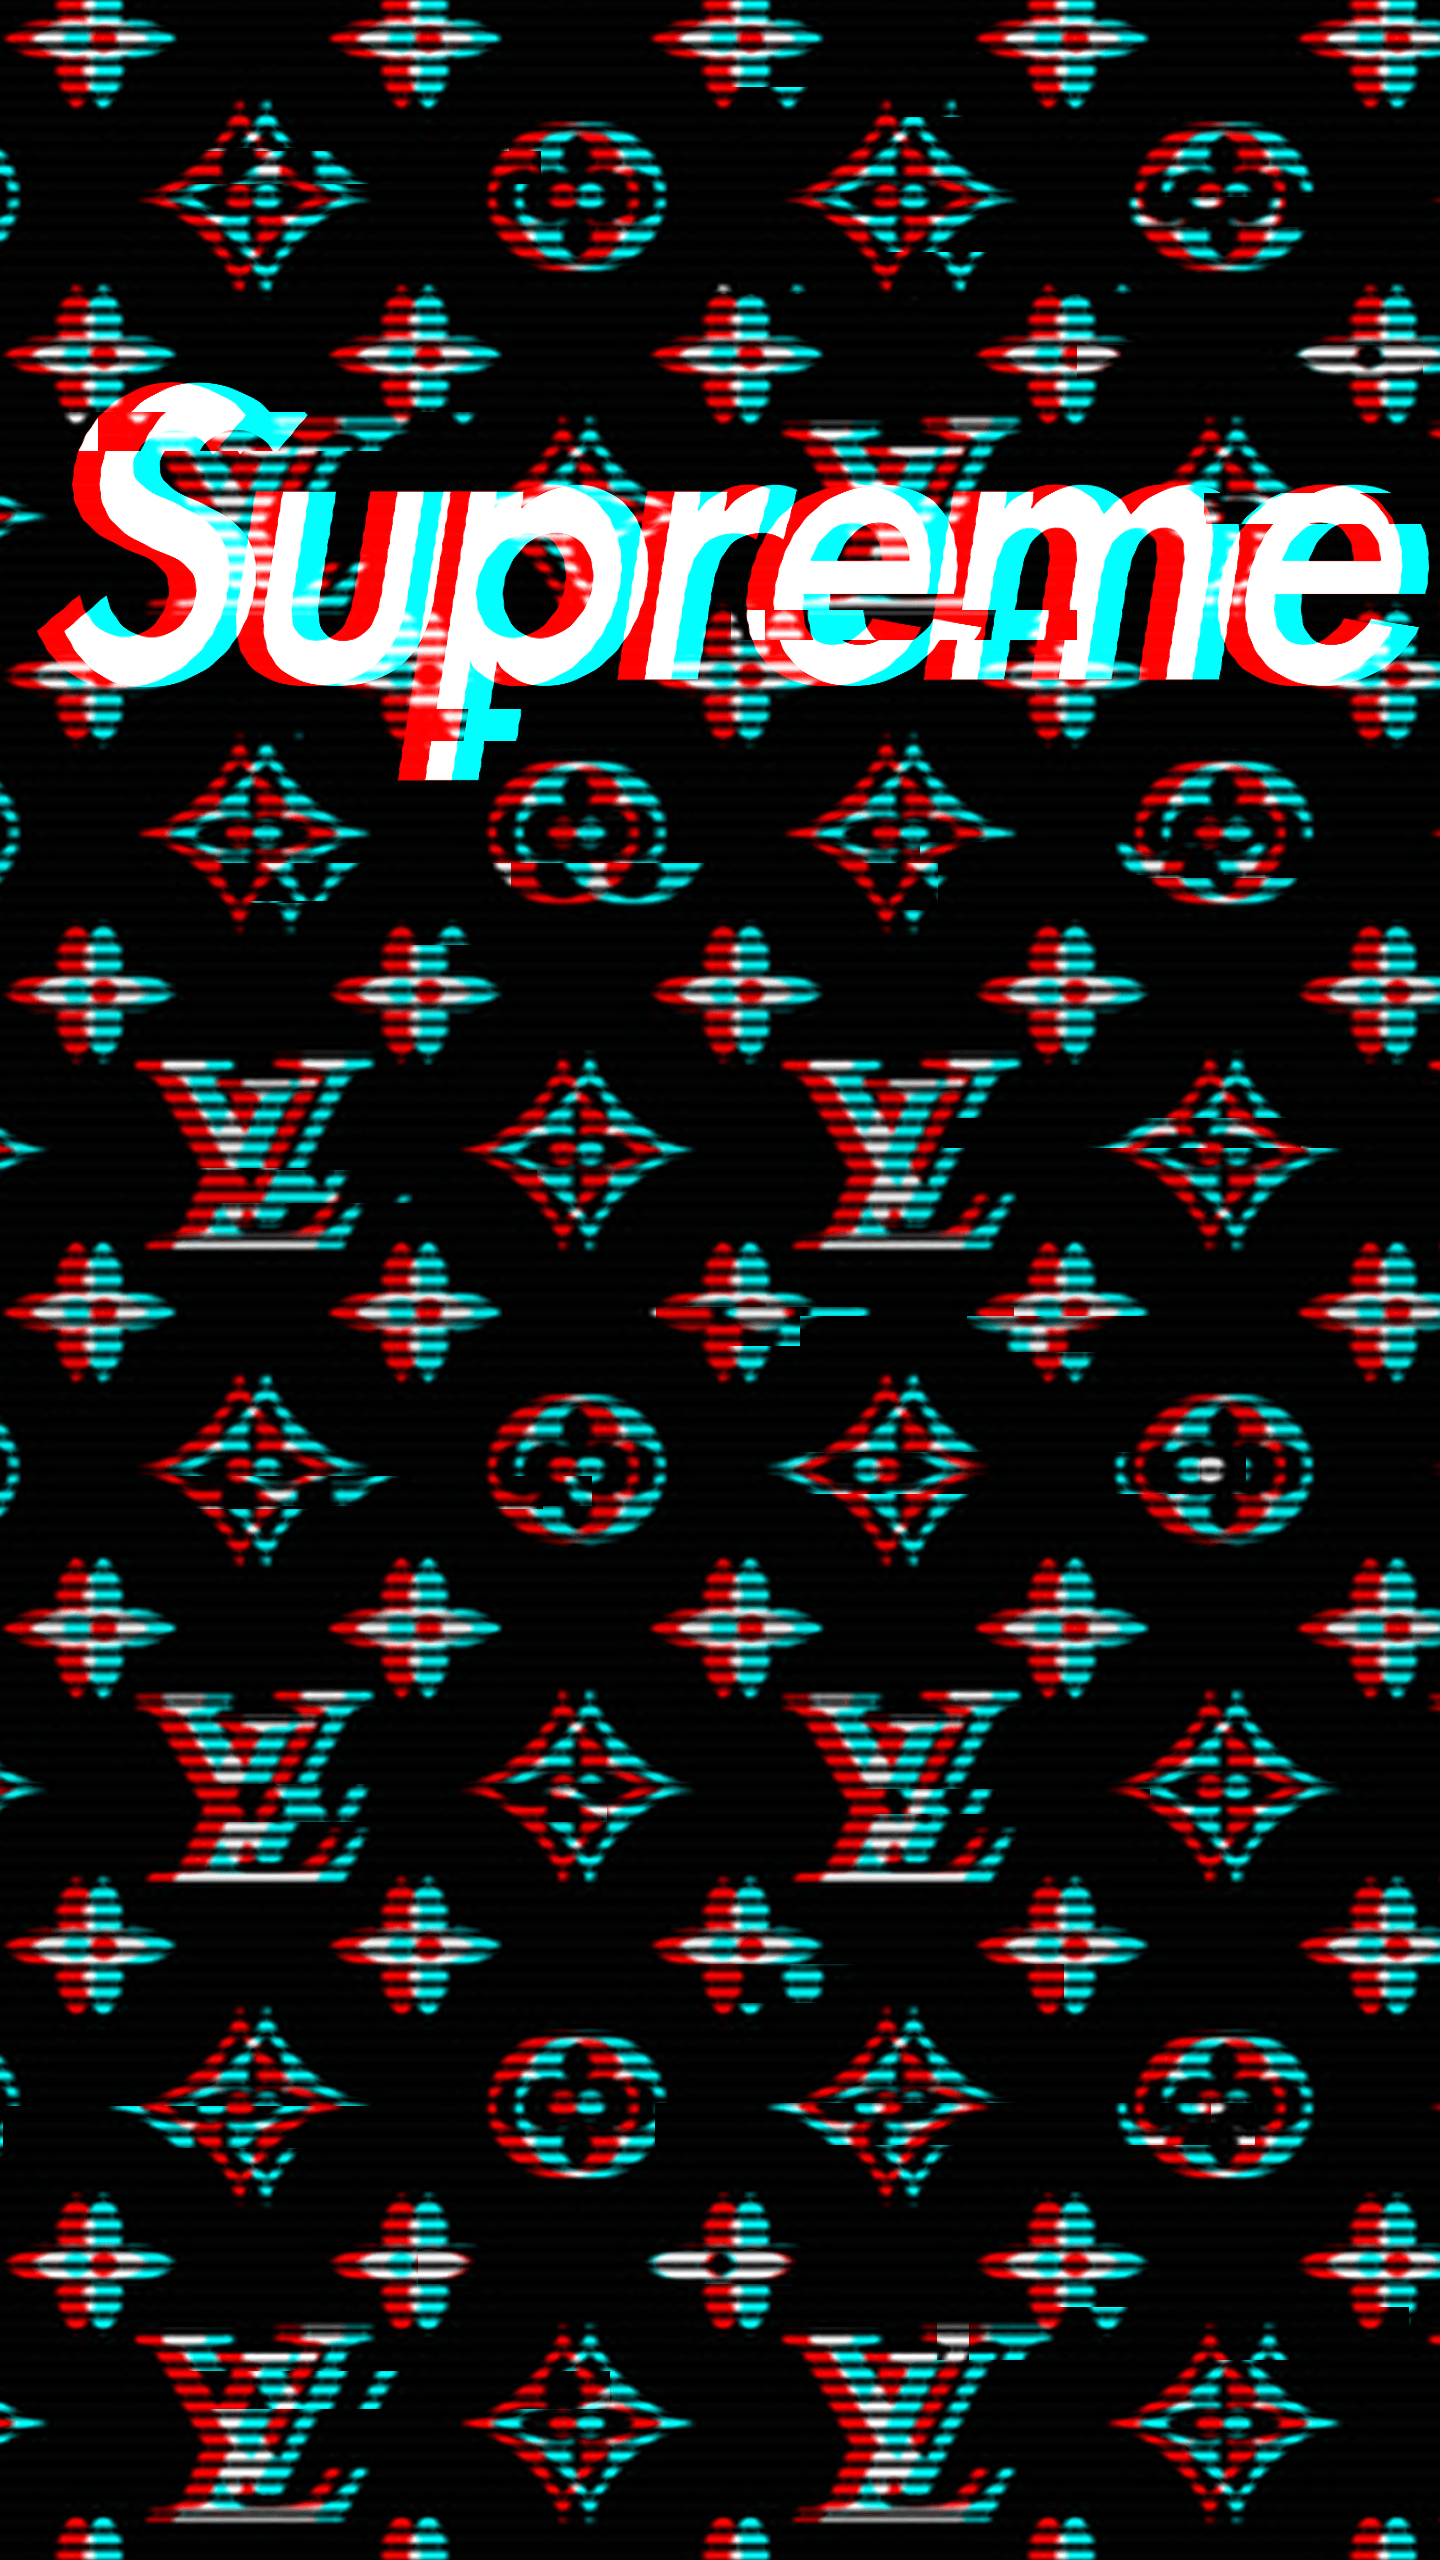 Download Leather Supreme And Louis Vuitton Phone Wallpaper